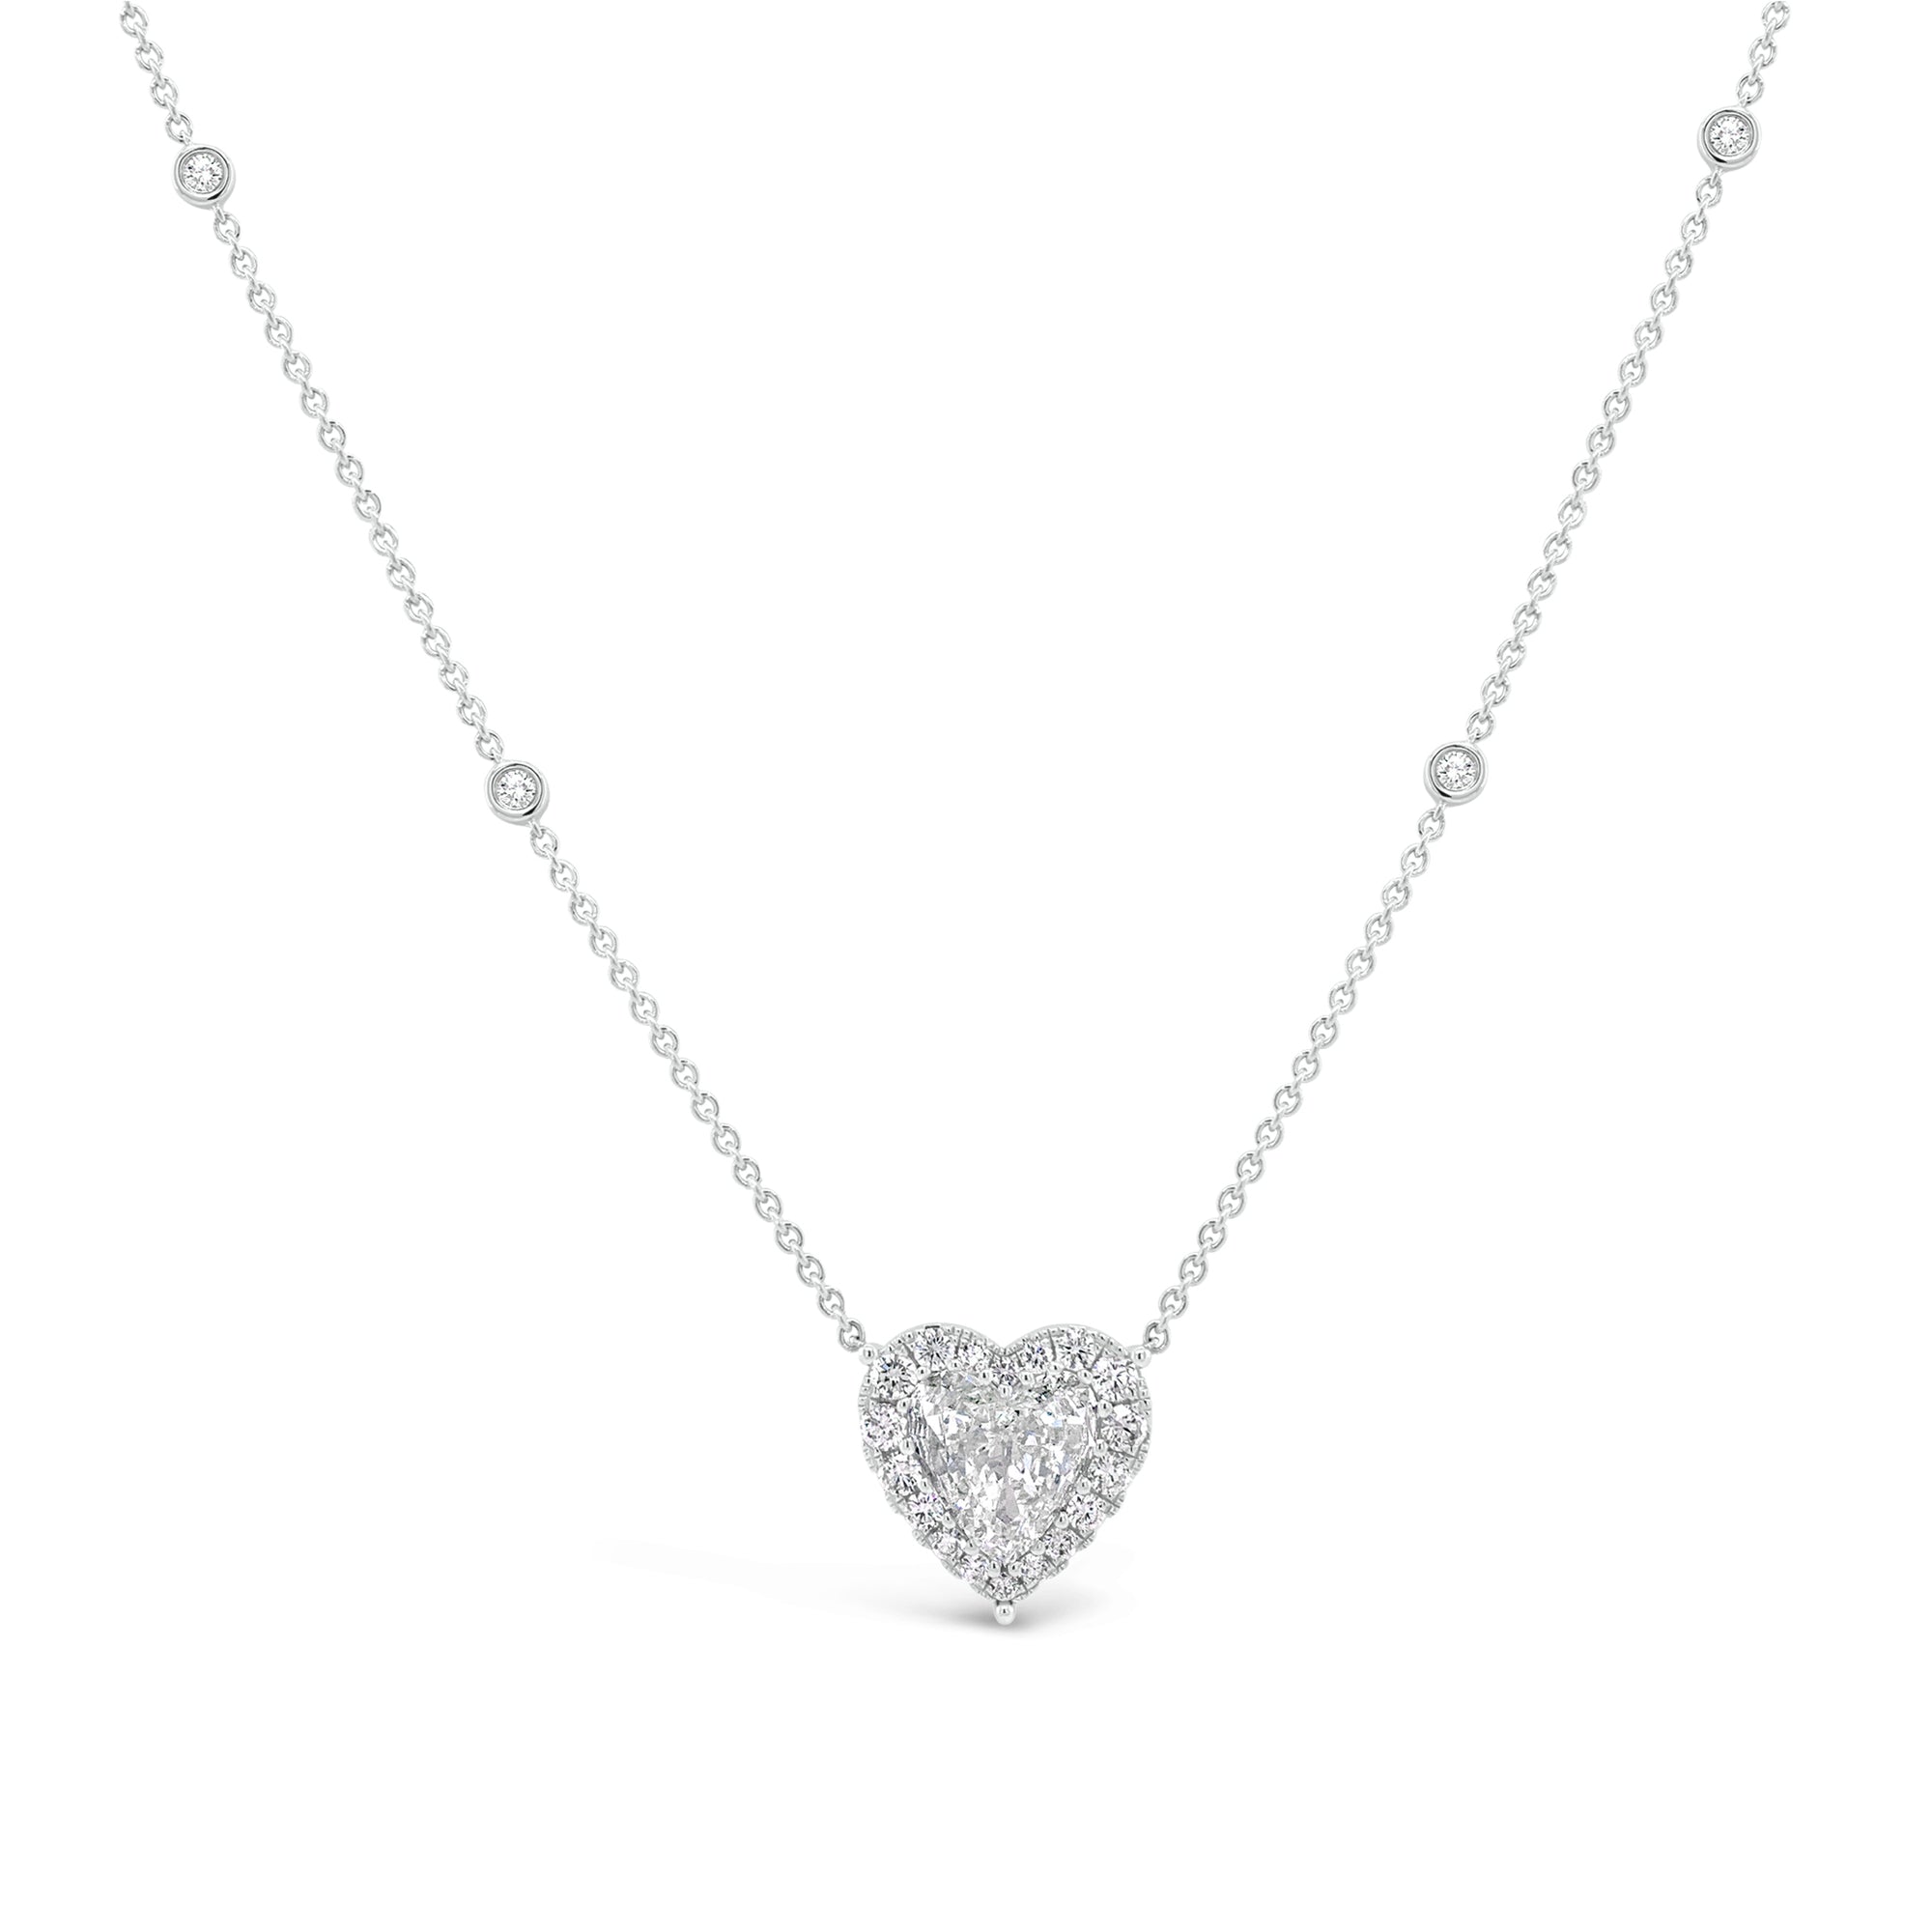 Diamond Heart Pendant Necklace with Halo  -18K gold weighing 5.99 grams  -1.67 ct heart-shaped diamond (GIA-graded J color, SI2 clarity)  -22 round diamonds totaling 0.58 carats